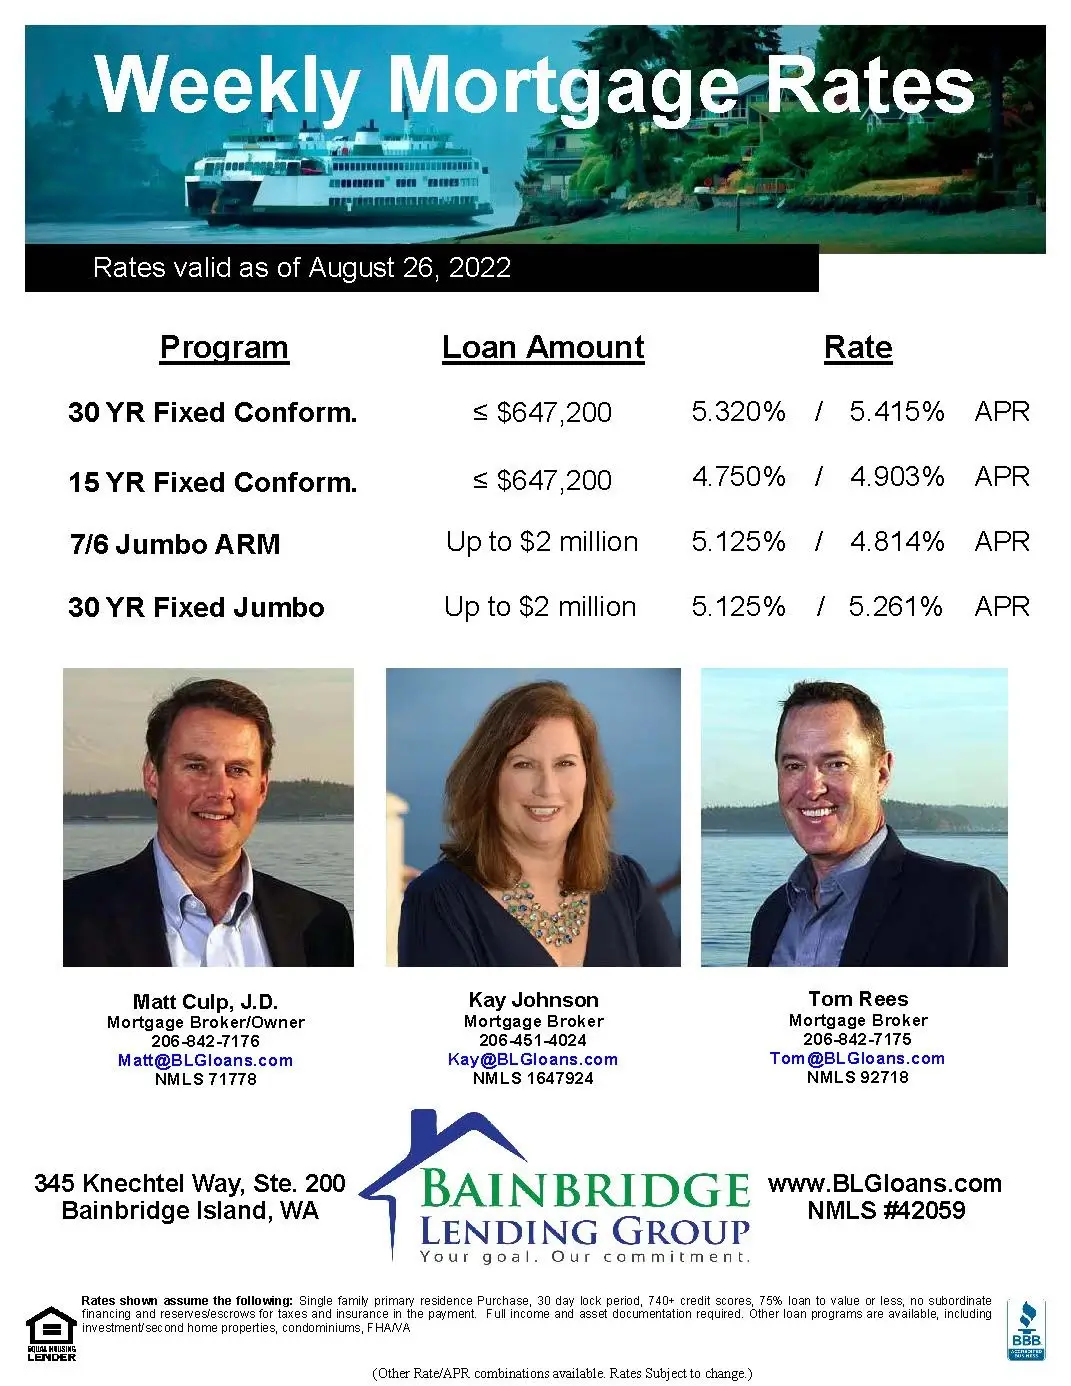 Weekly Rate Update for August 26, 2022